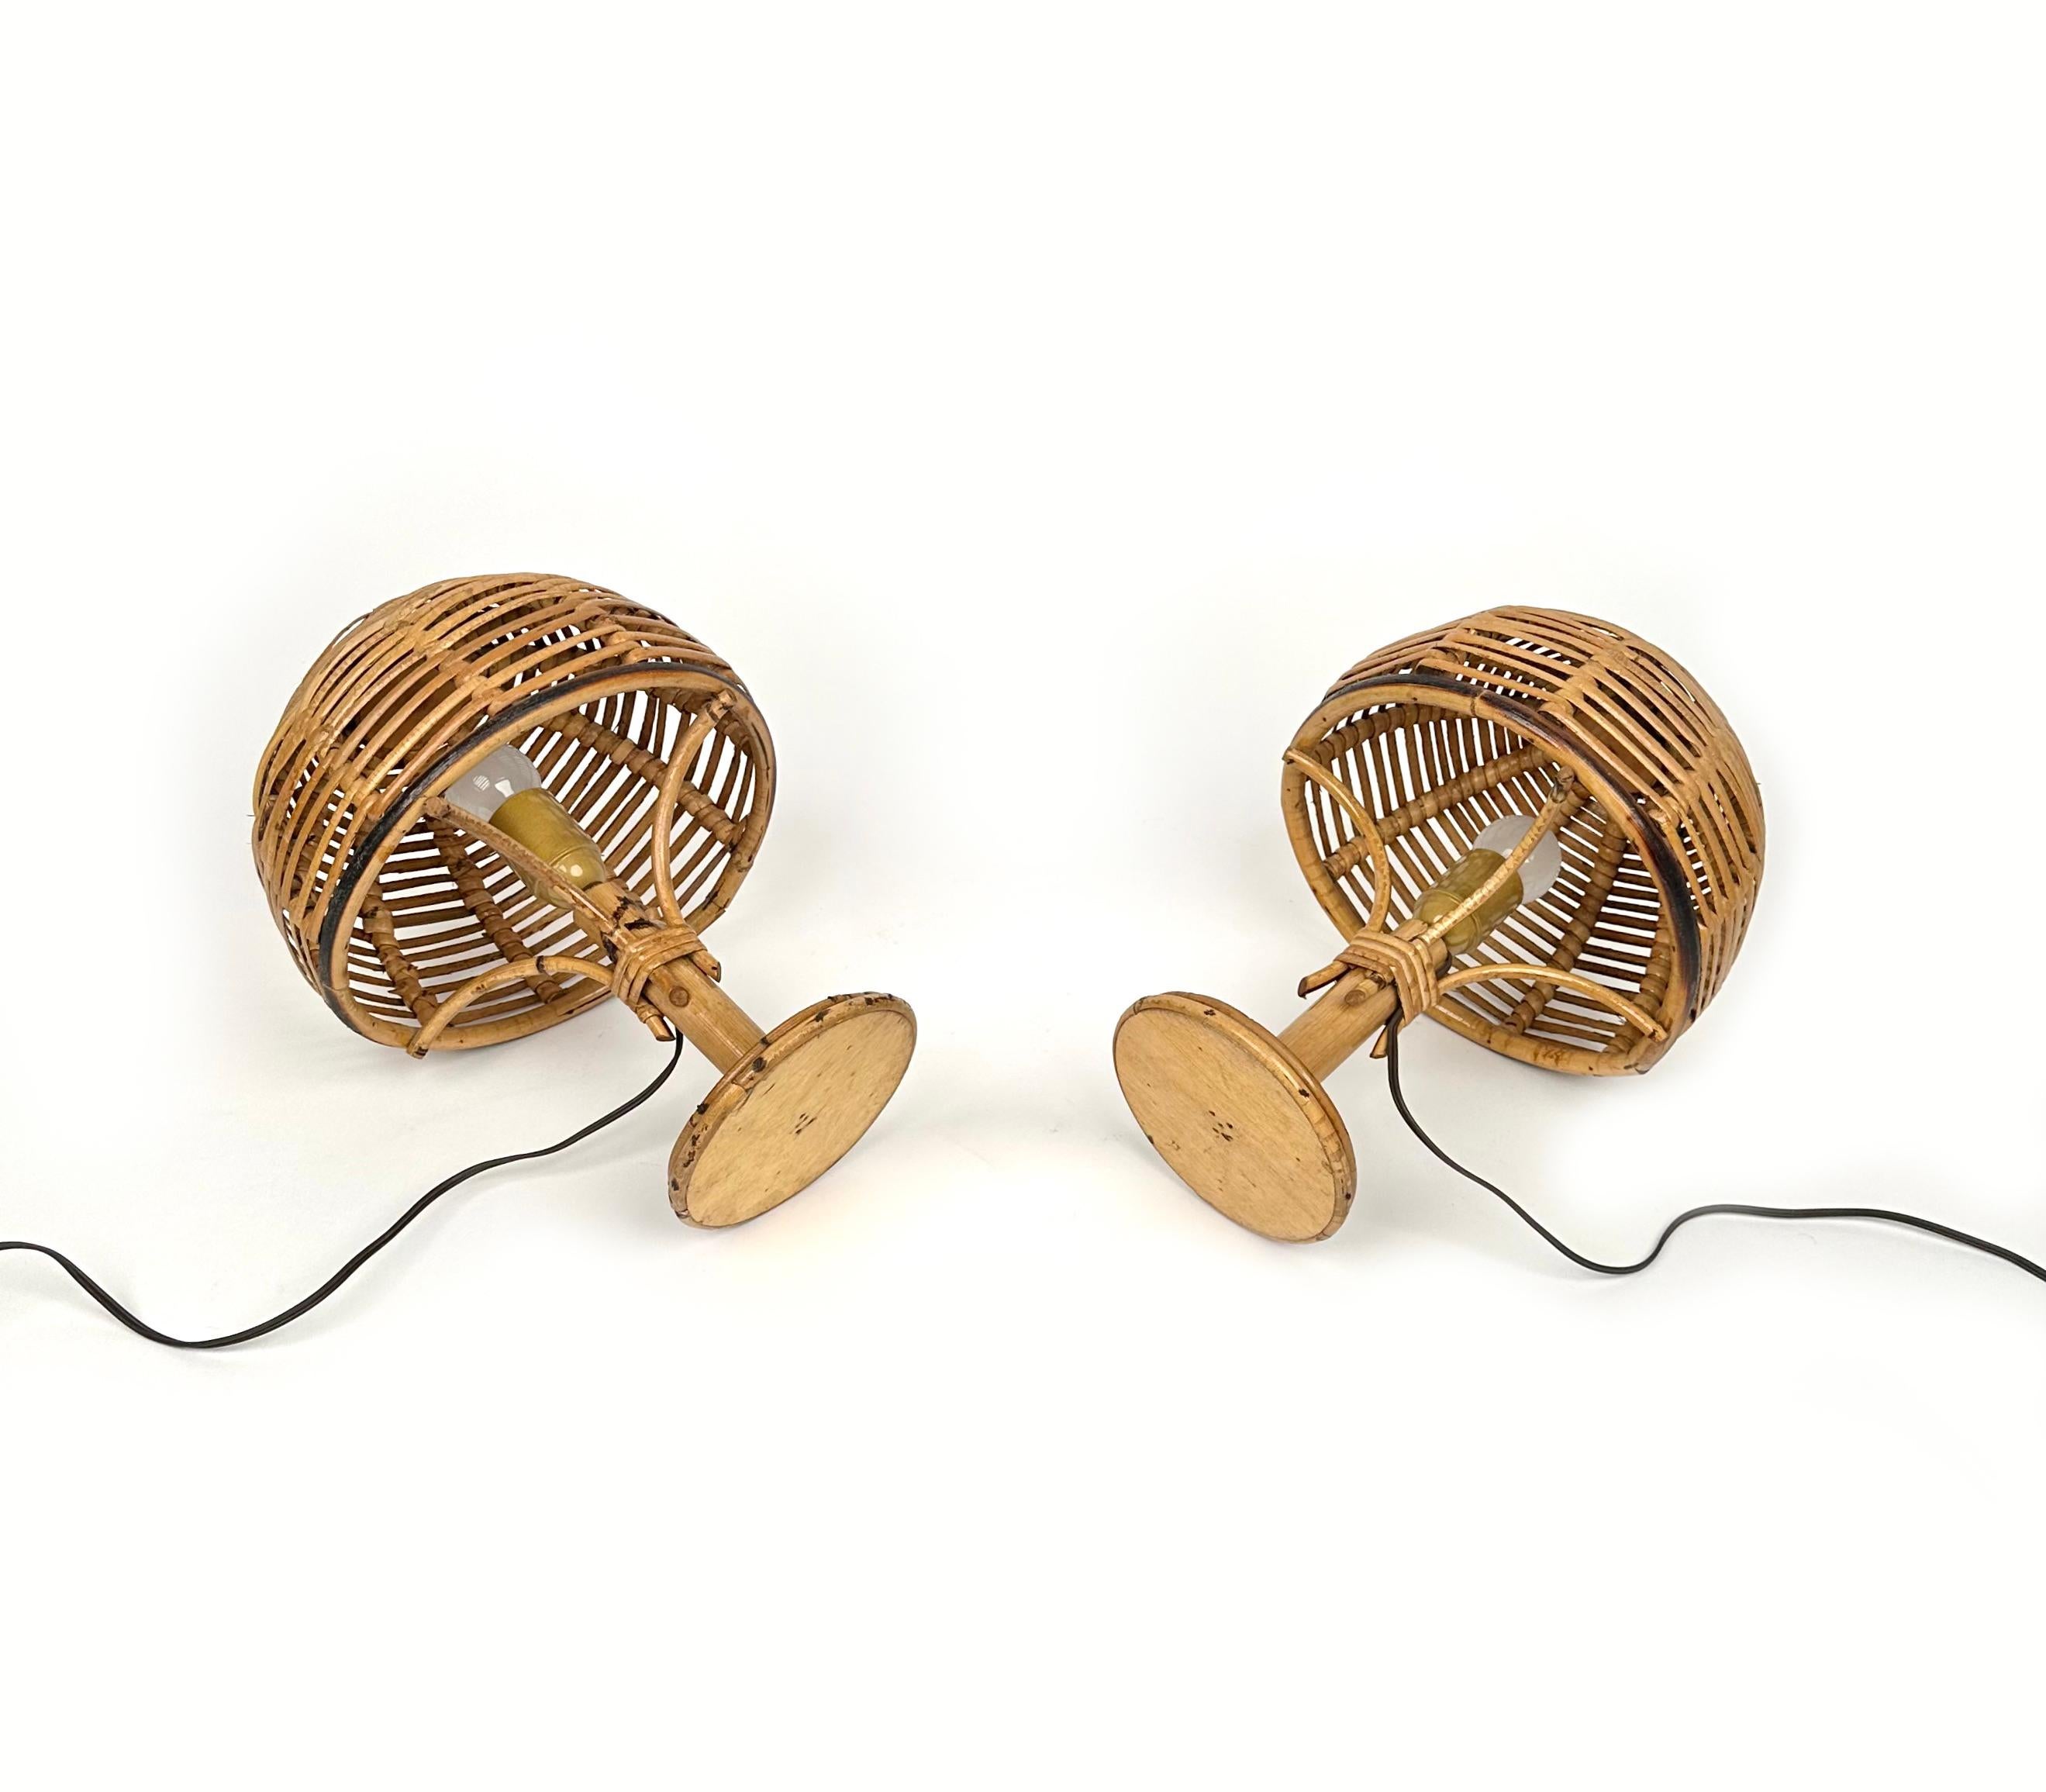 Midcentury Bamboo and Rattan Pair of Table Lamps Louis Sognot Style, Italy 1960s For Sale 5